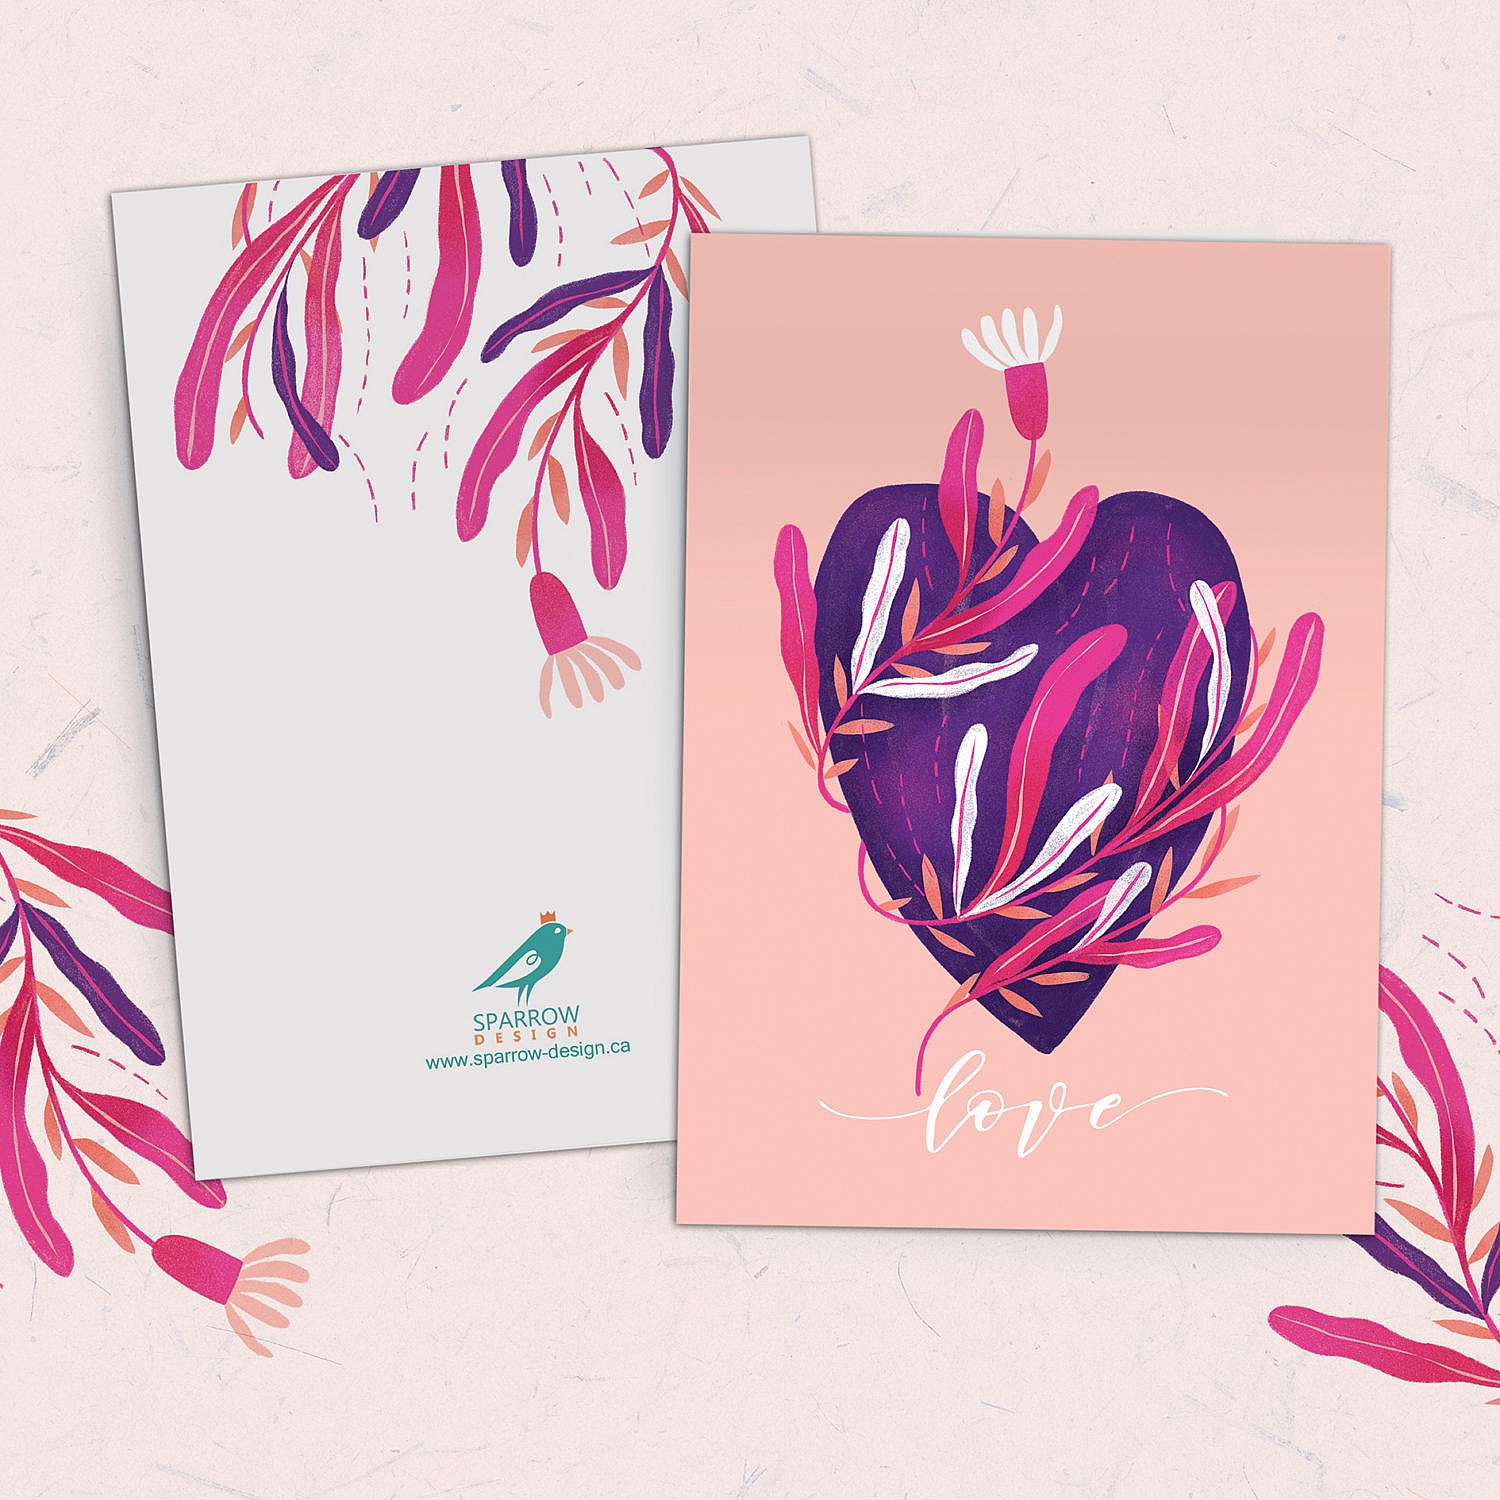 Valentine's card showing a pink heart with light pink and white flowers around it